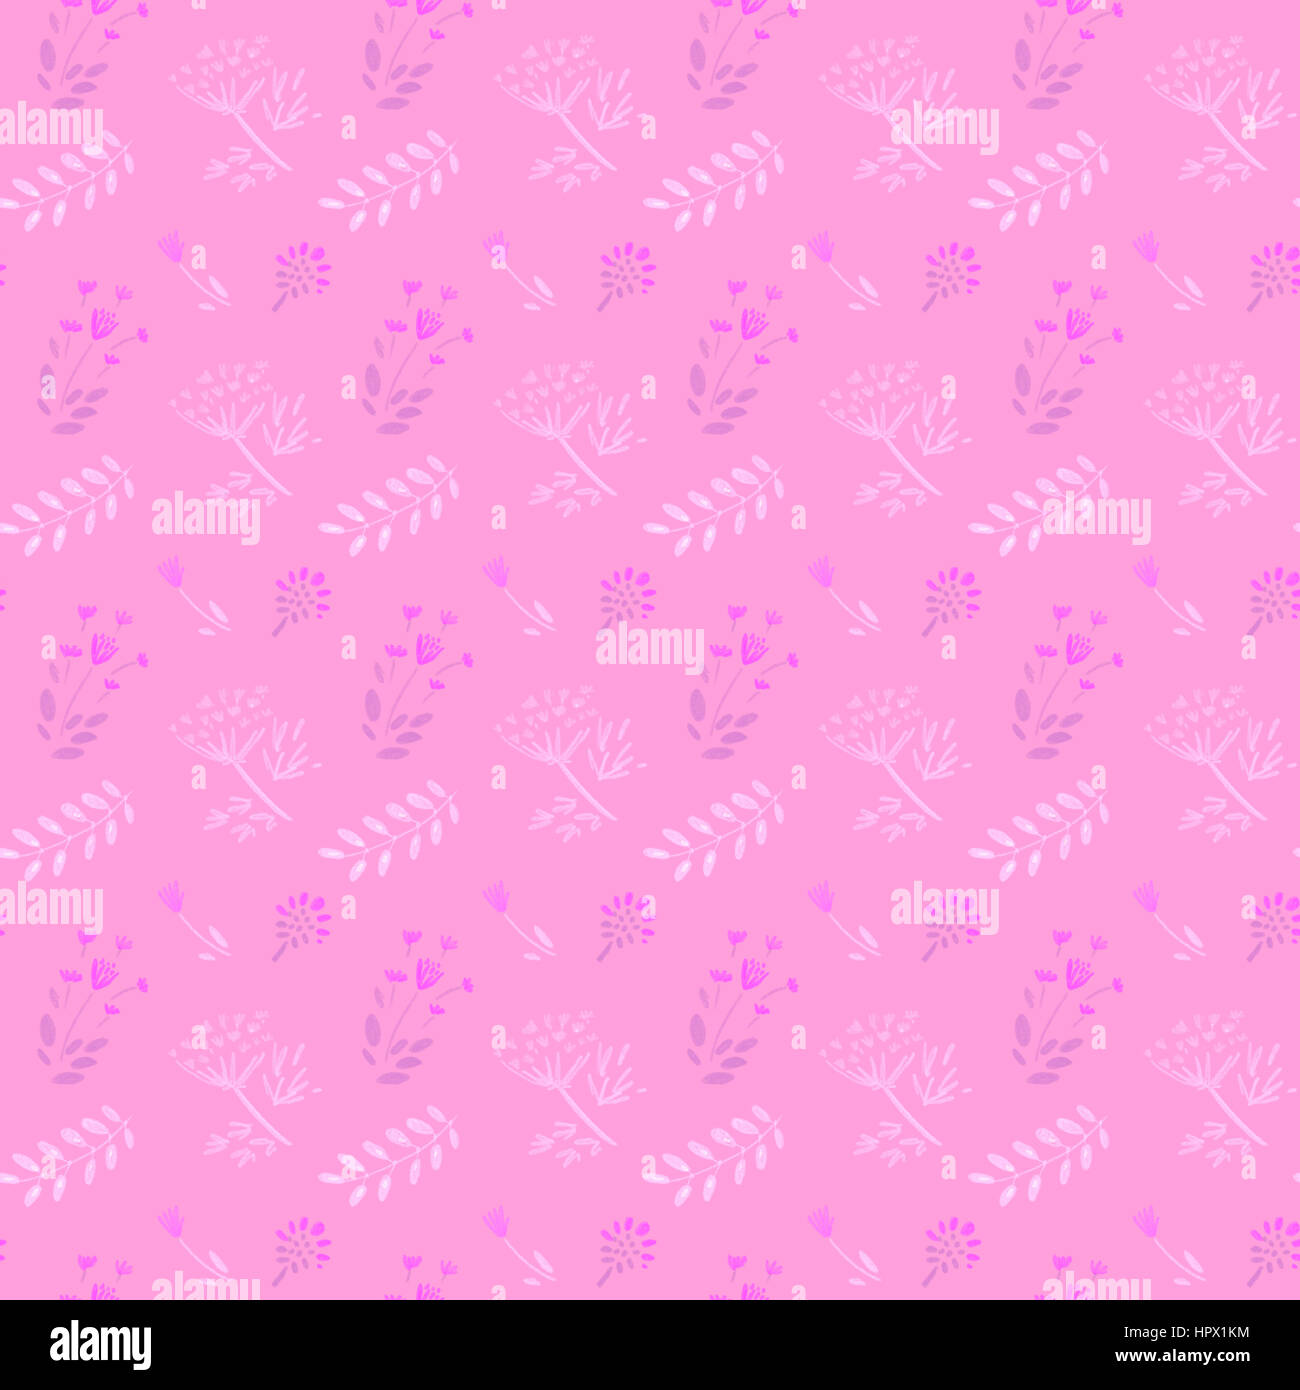 Seamless pattern with cute little flowers Stock Photo